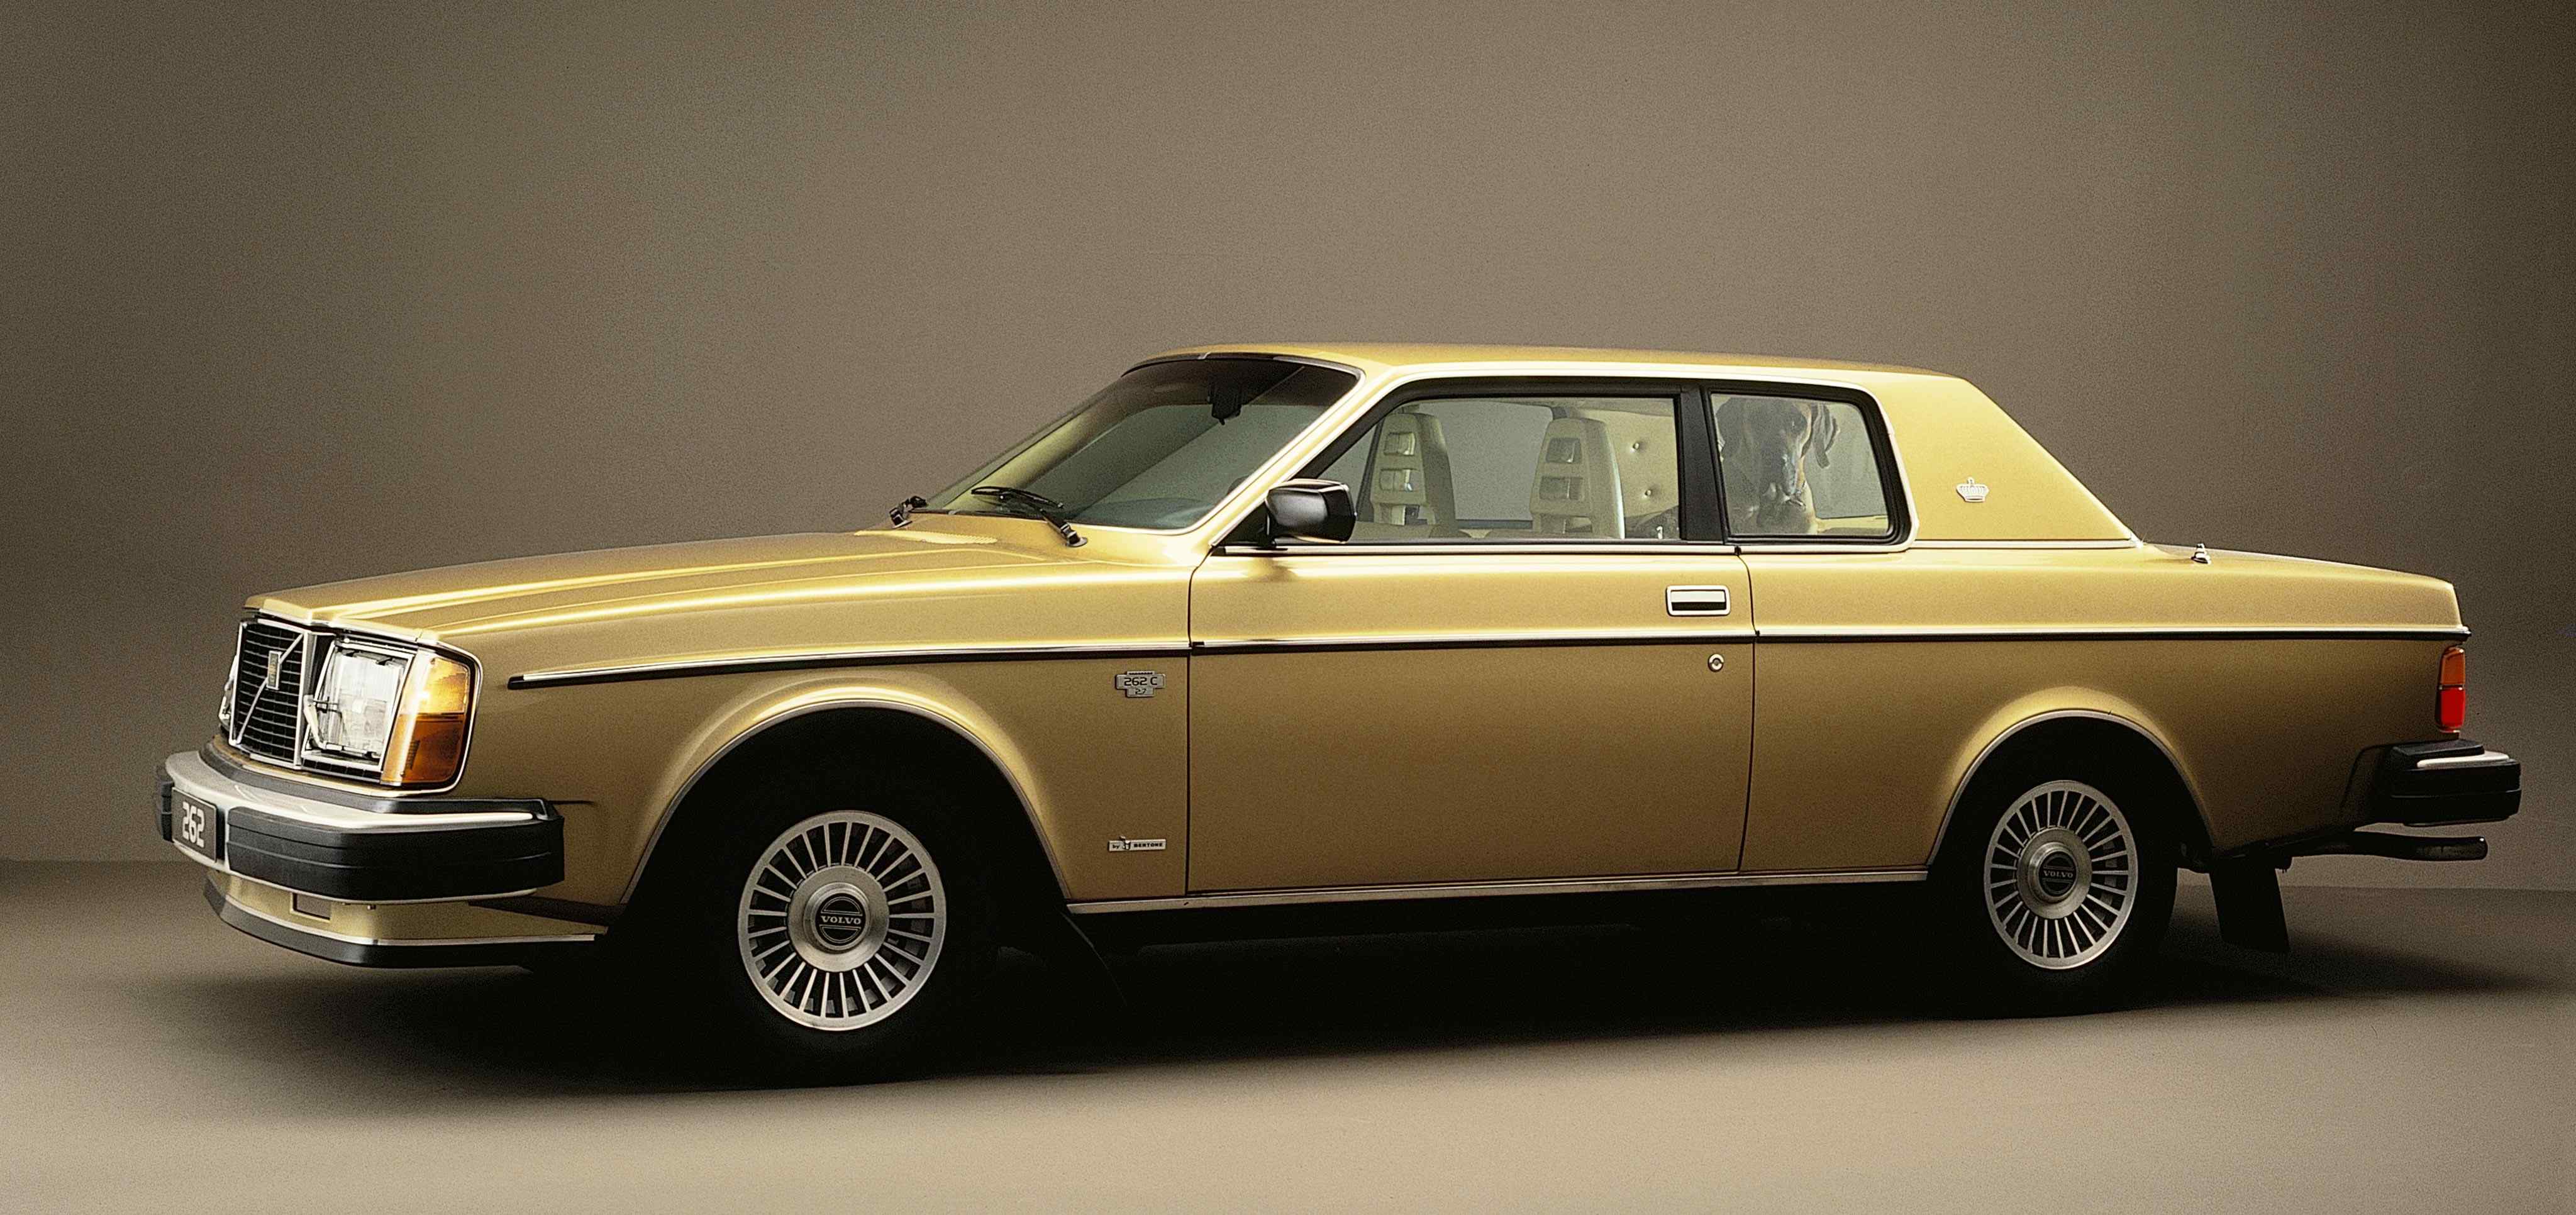 A gold Volvo 262C seen from side in studio environment